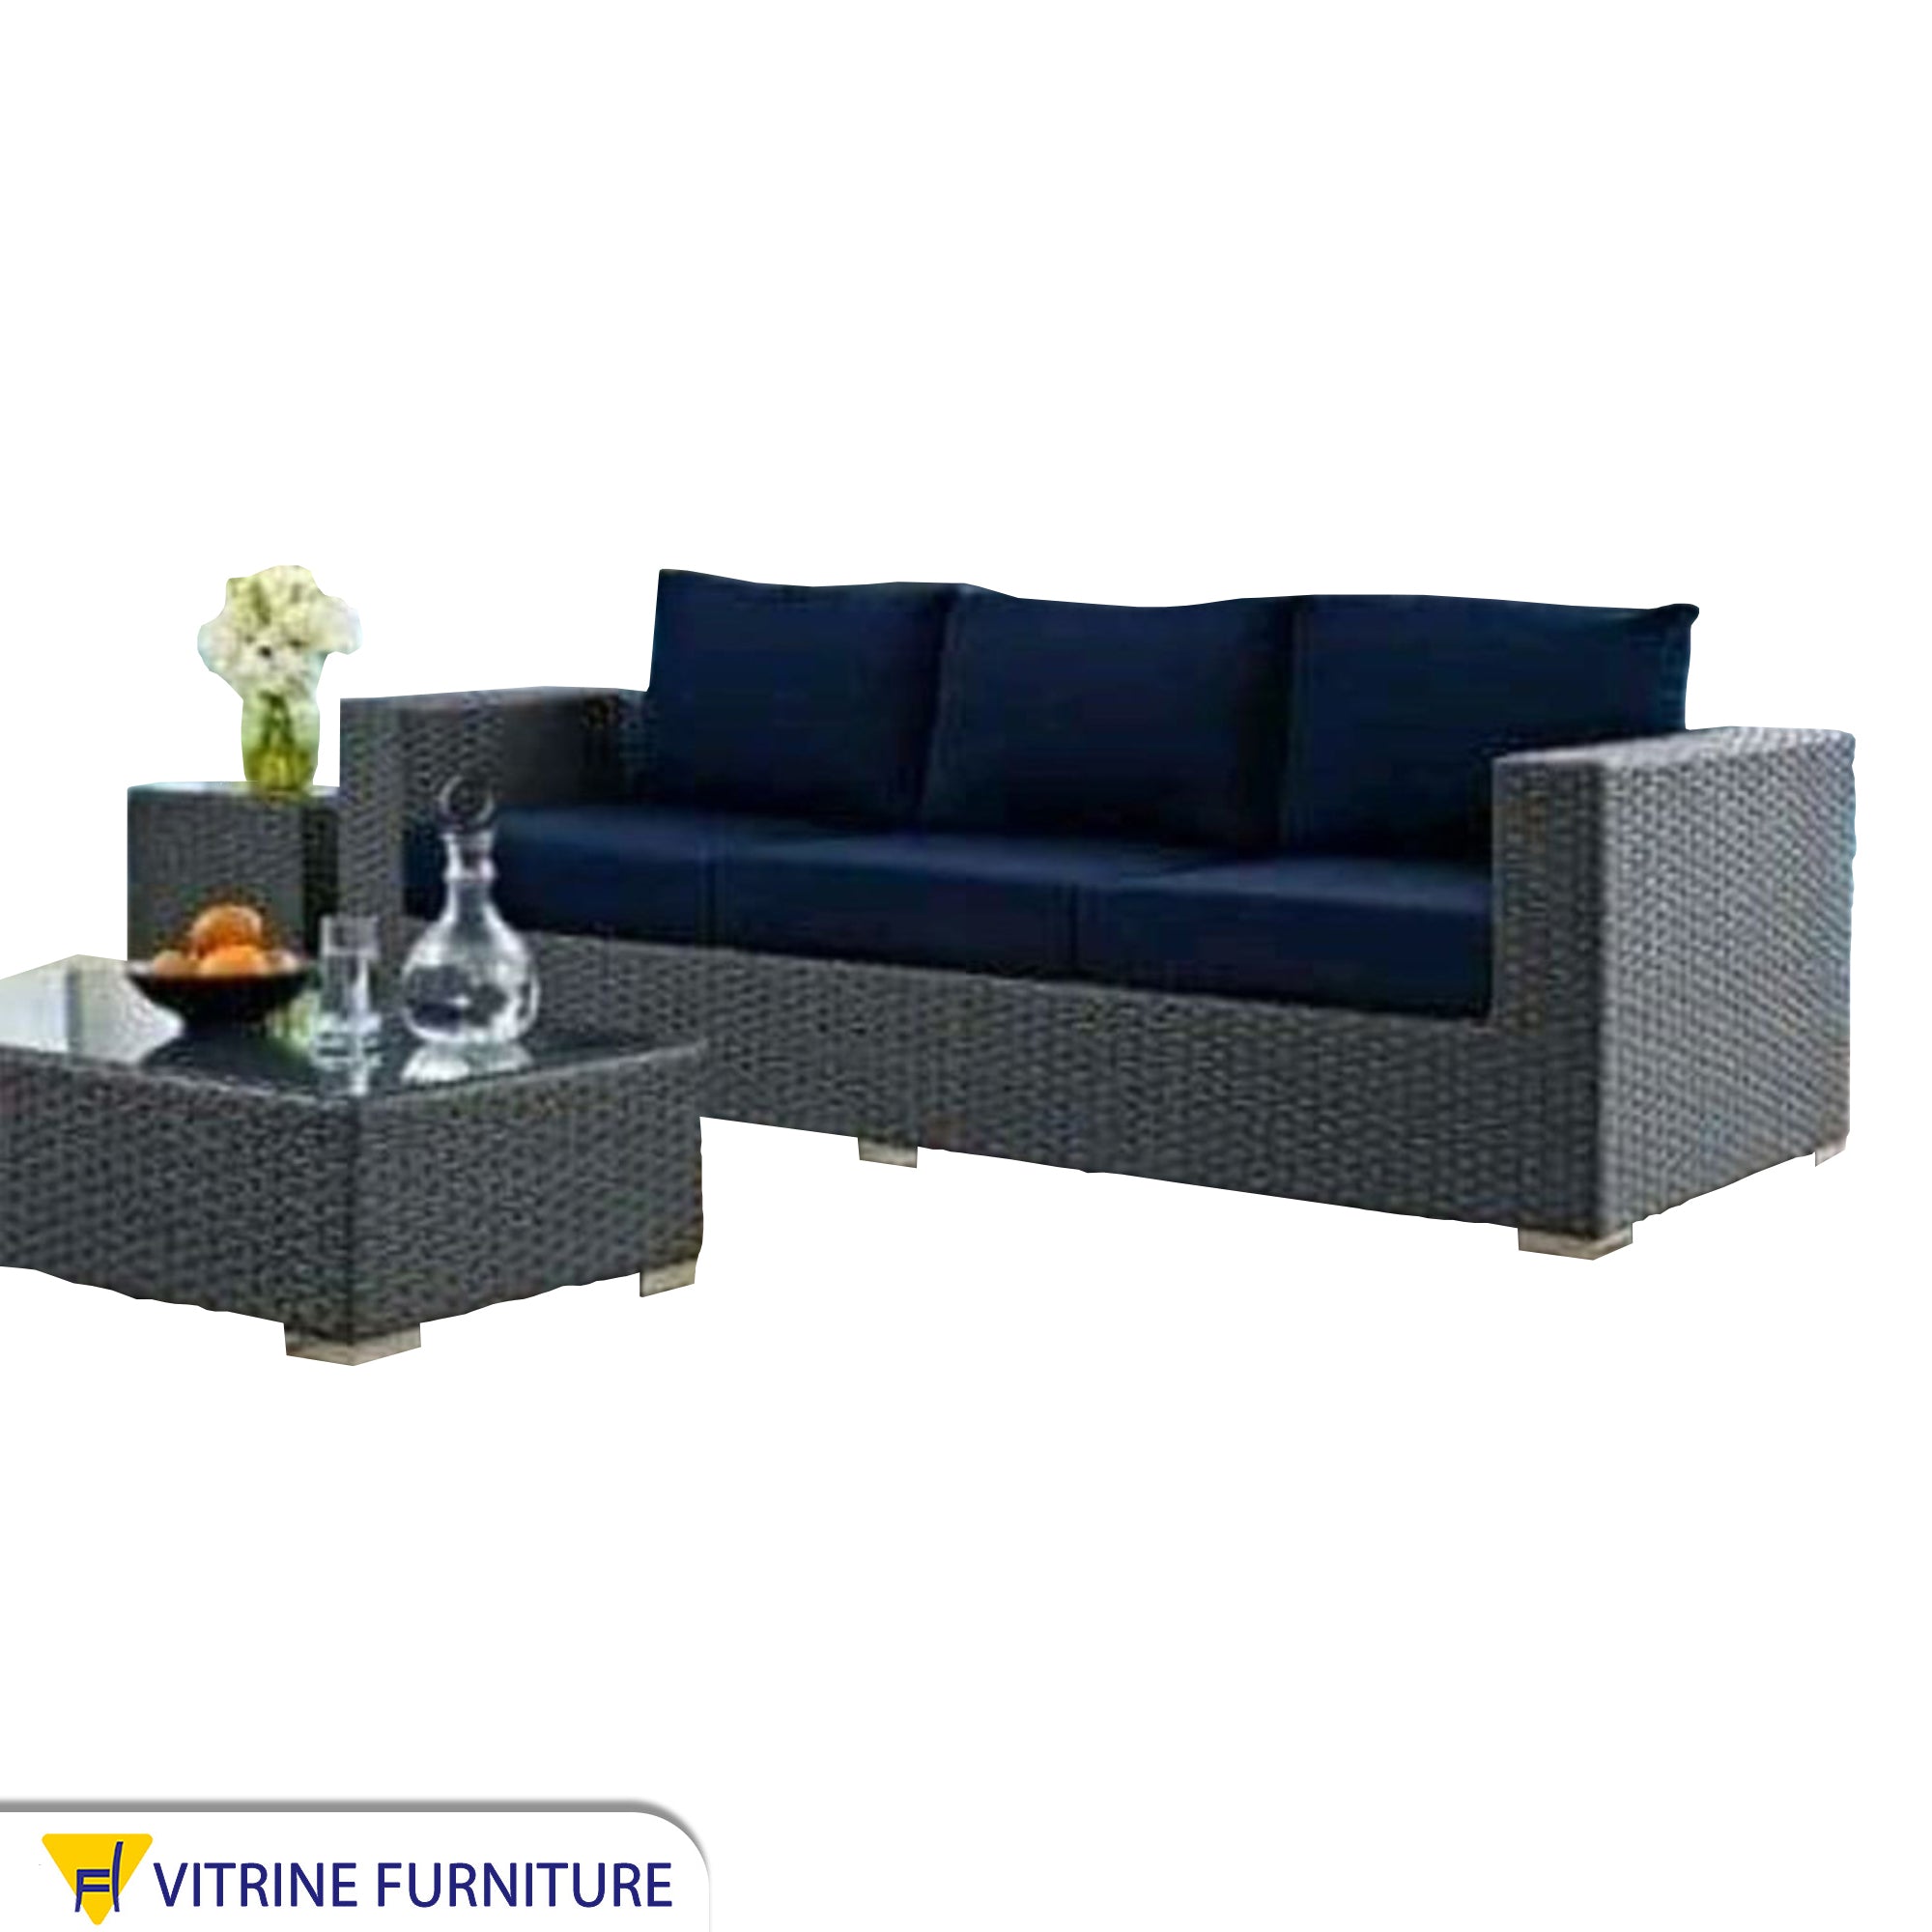 Gray triple sofa for outdoor spaces